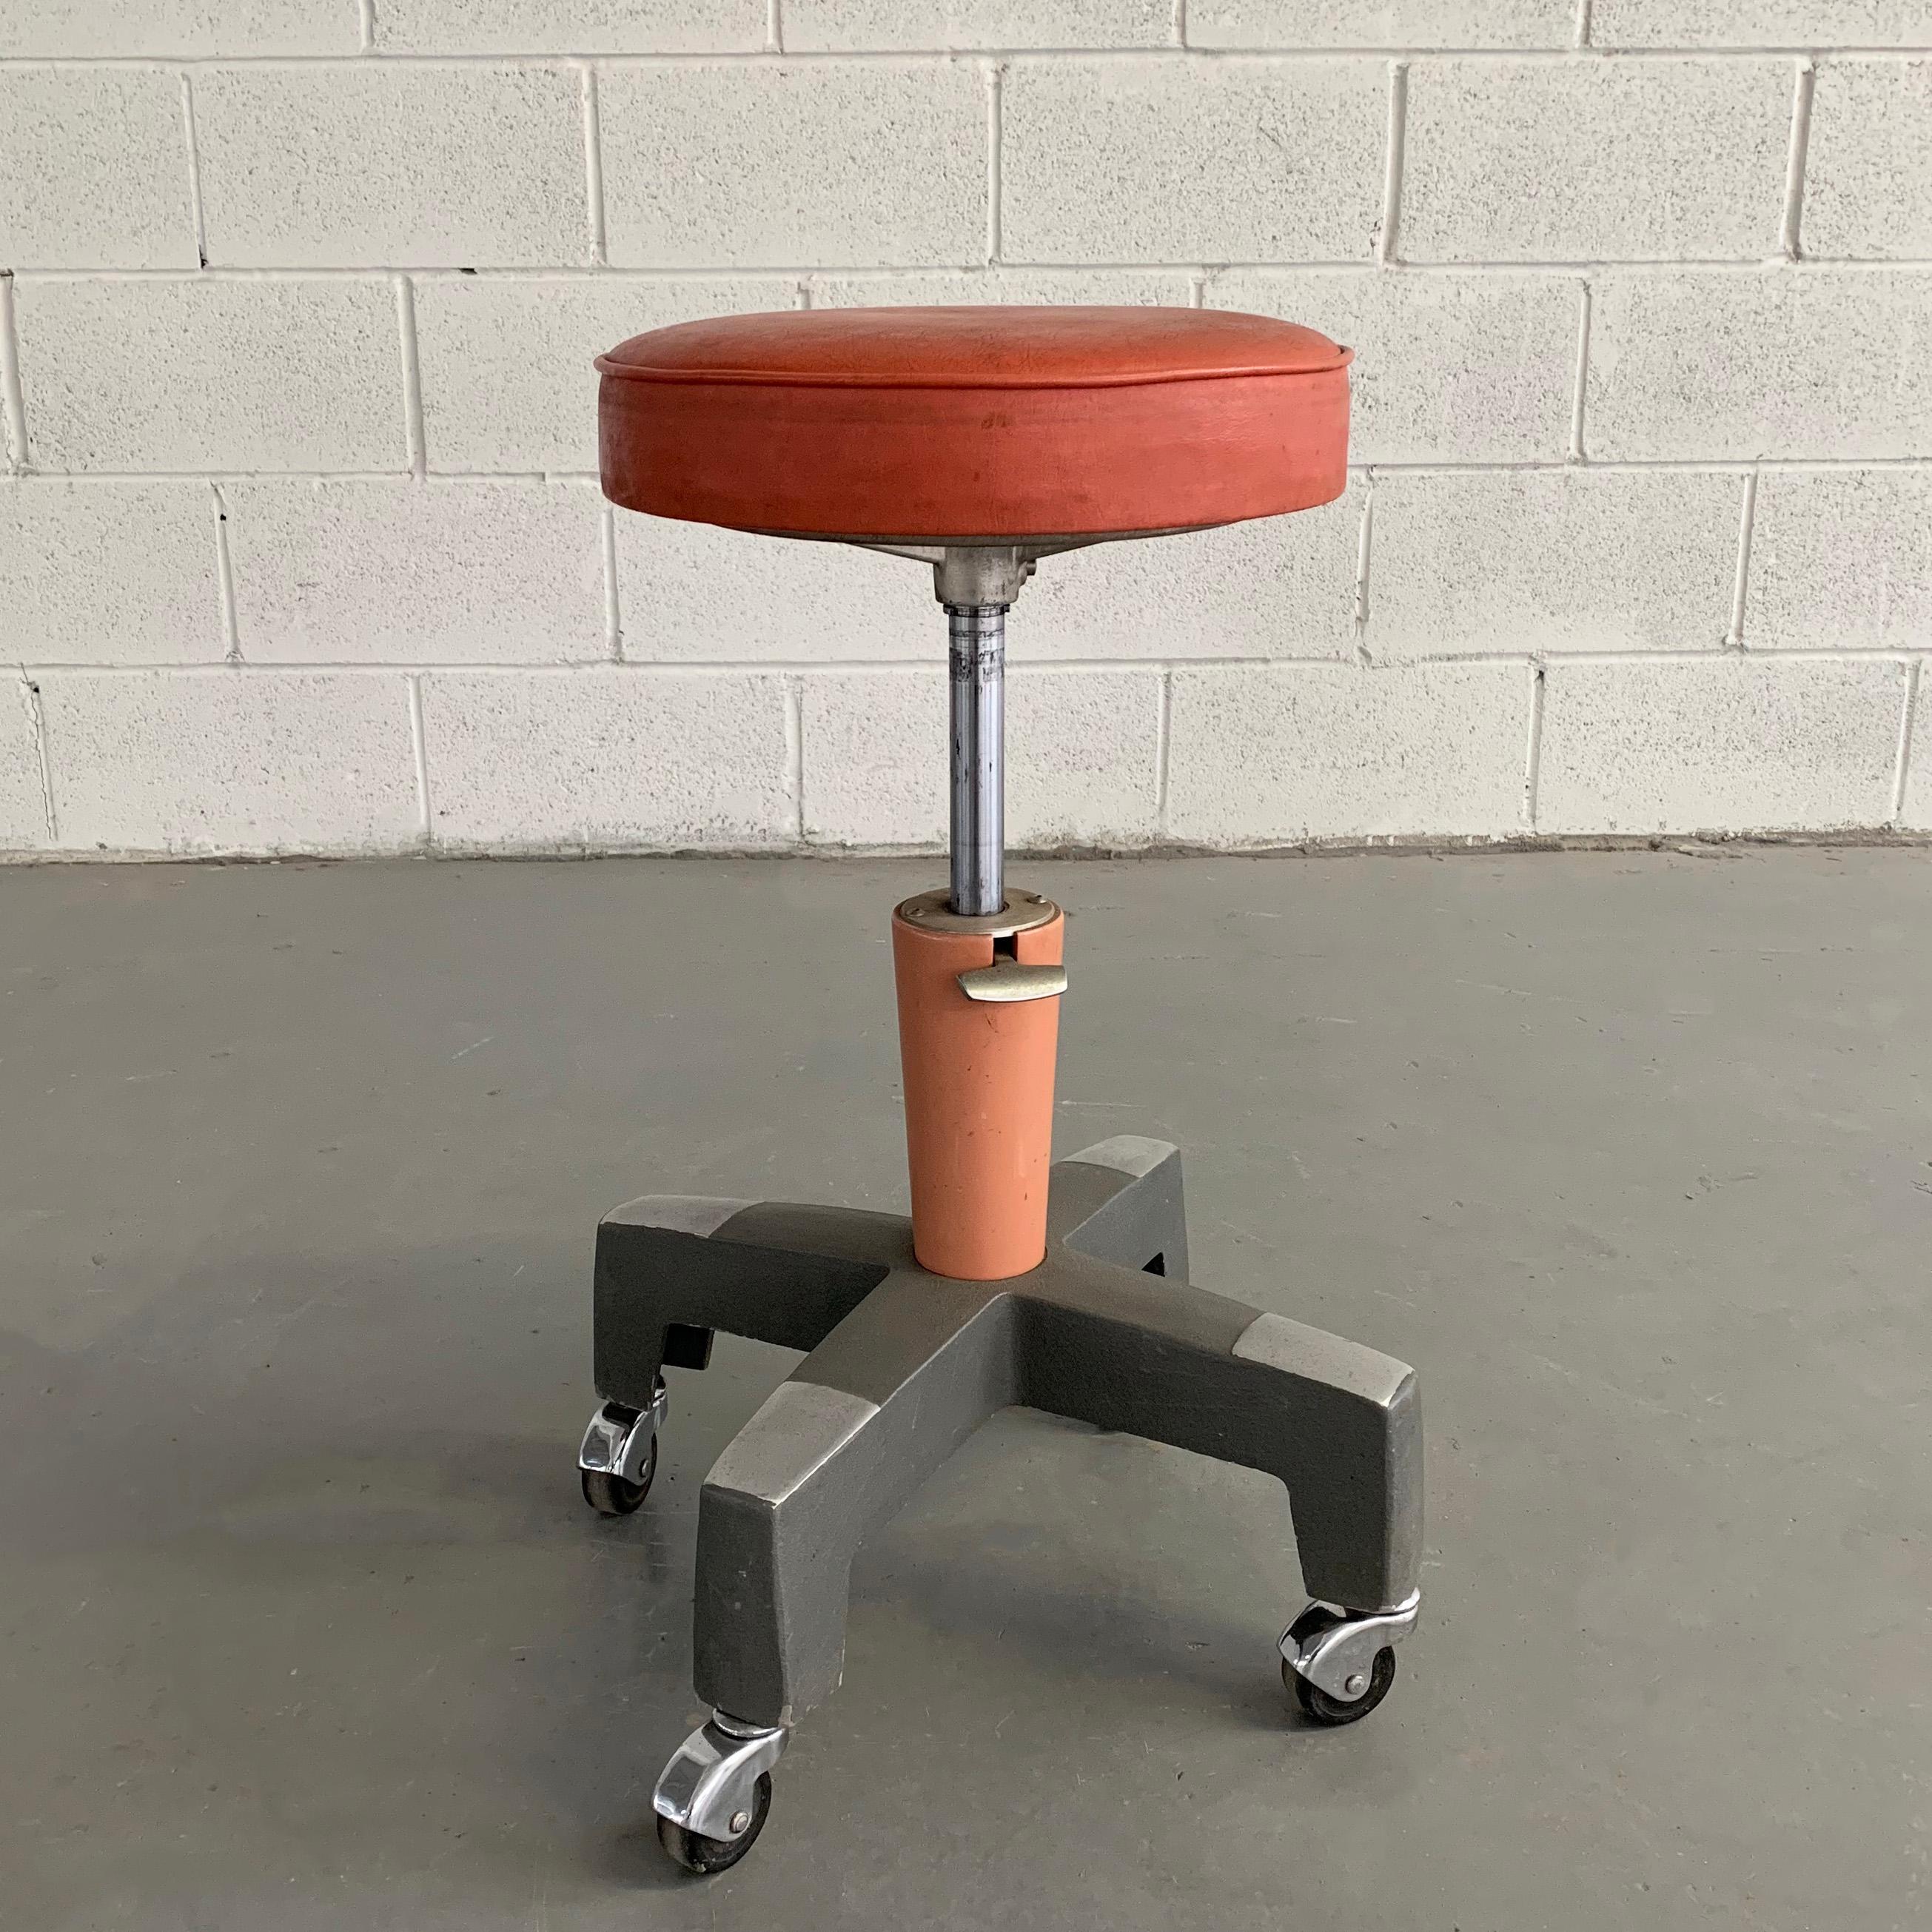 Industrial, midcentury, medical, optometrist stool by American Optical Company with orange vinyl upholstered, 12 inch diameter seat is height adjustable from 17 - 25 inches with enameled base adjustment.